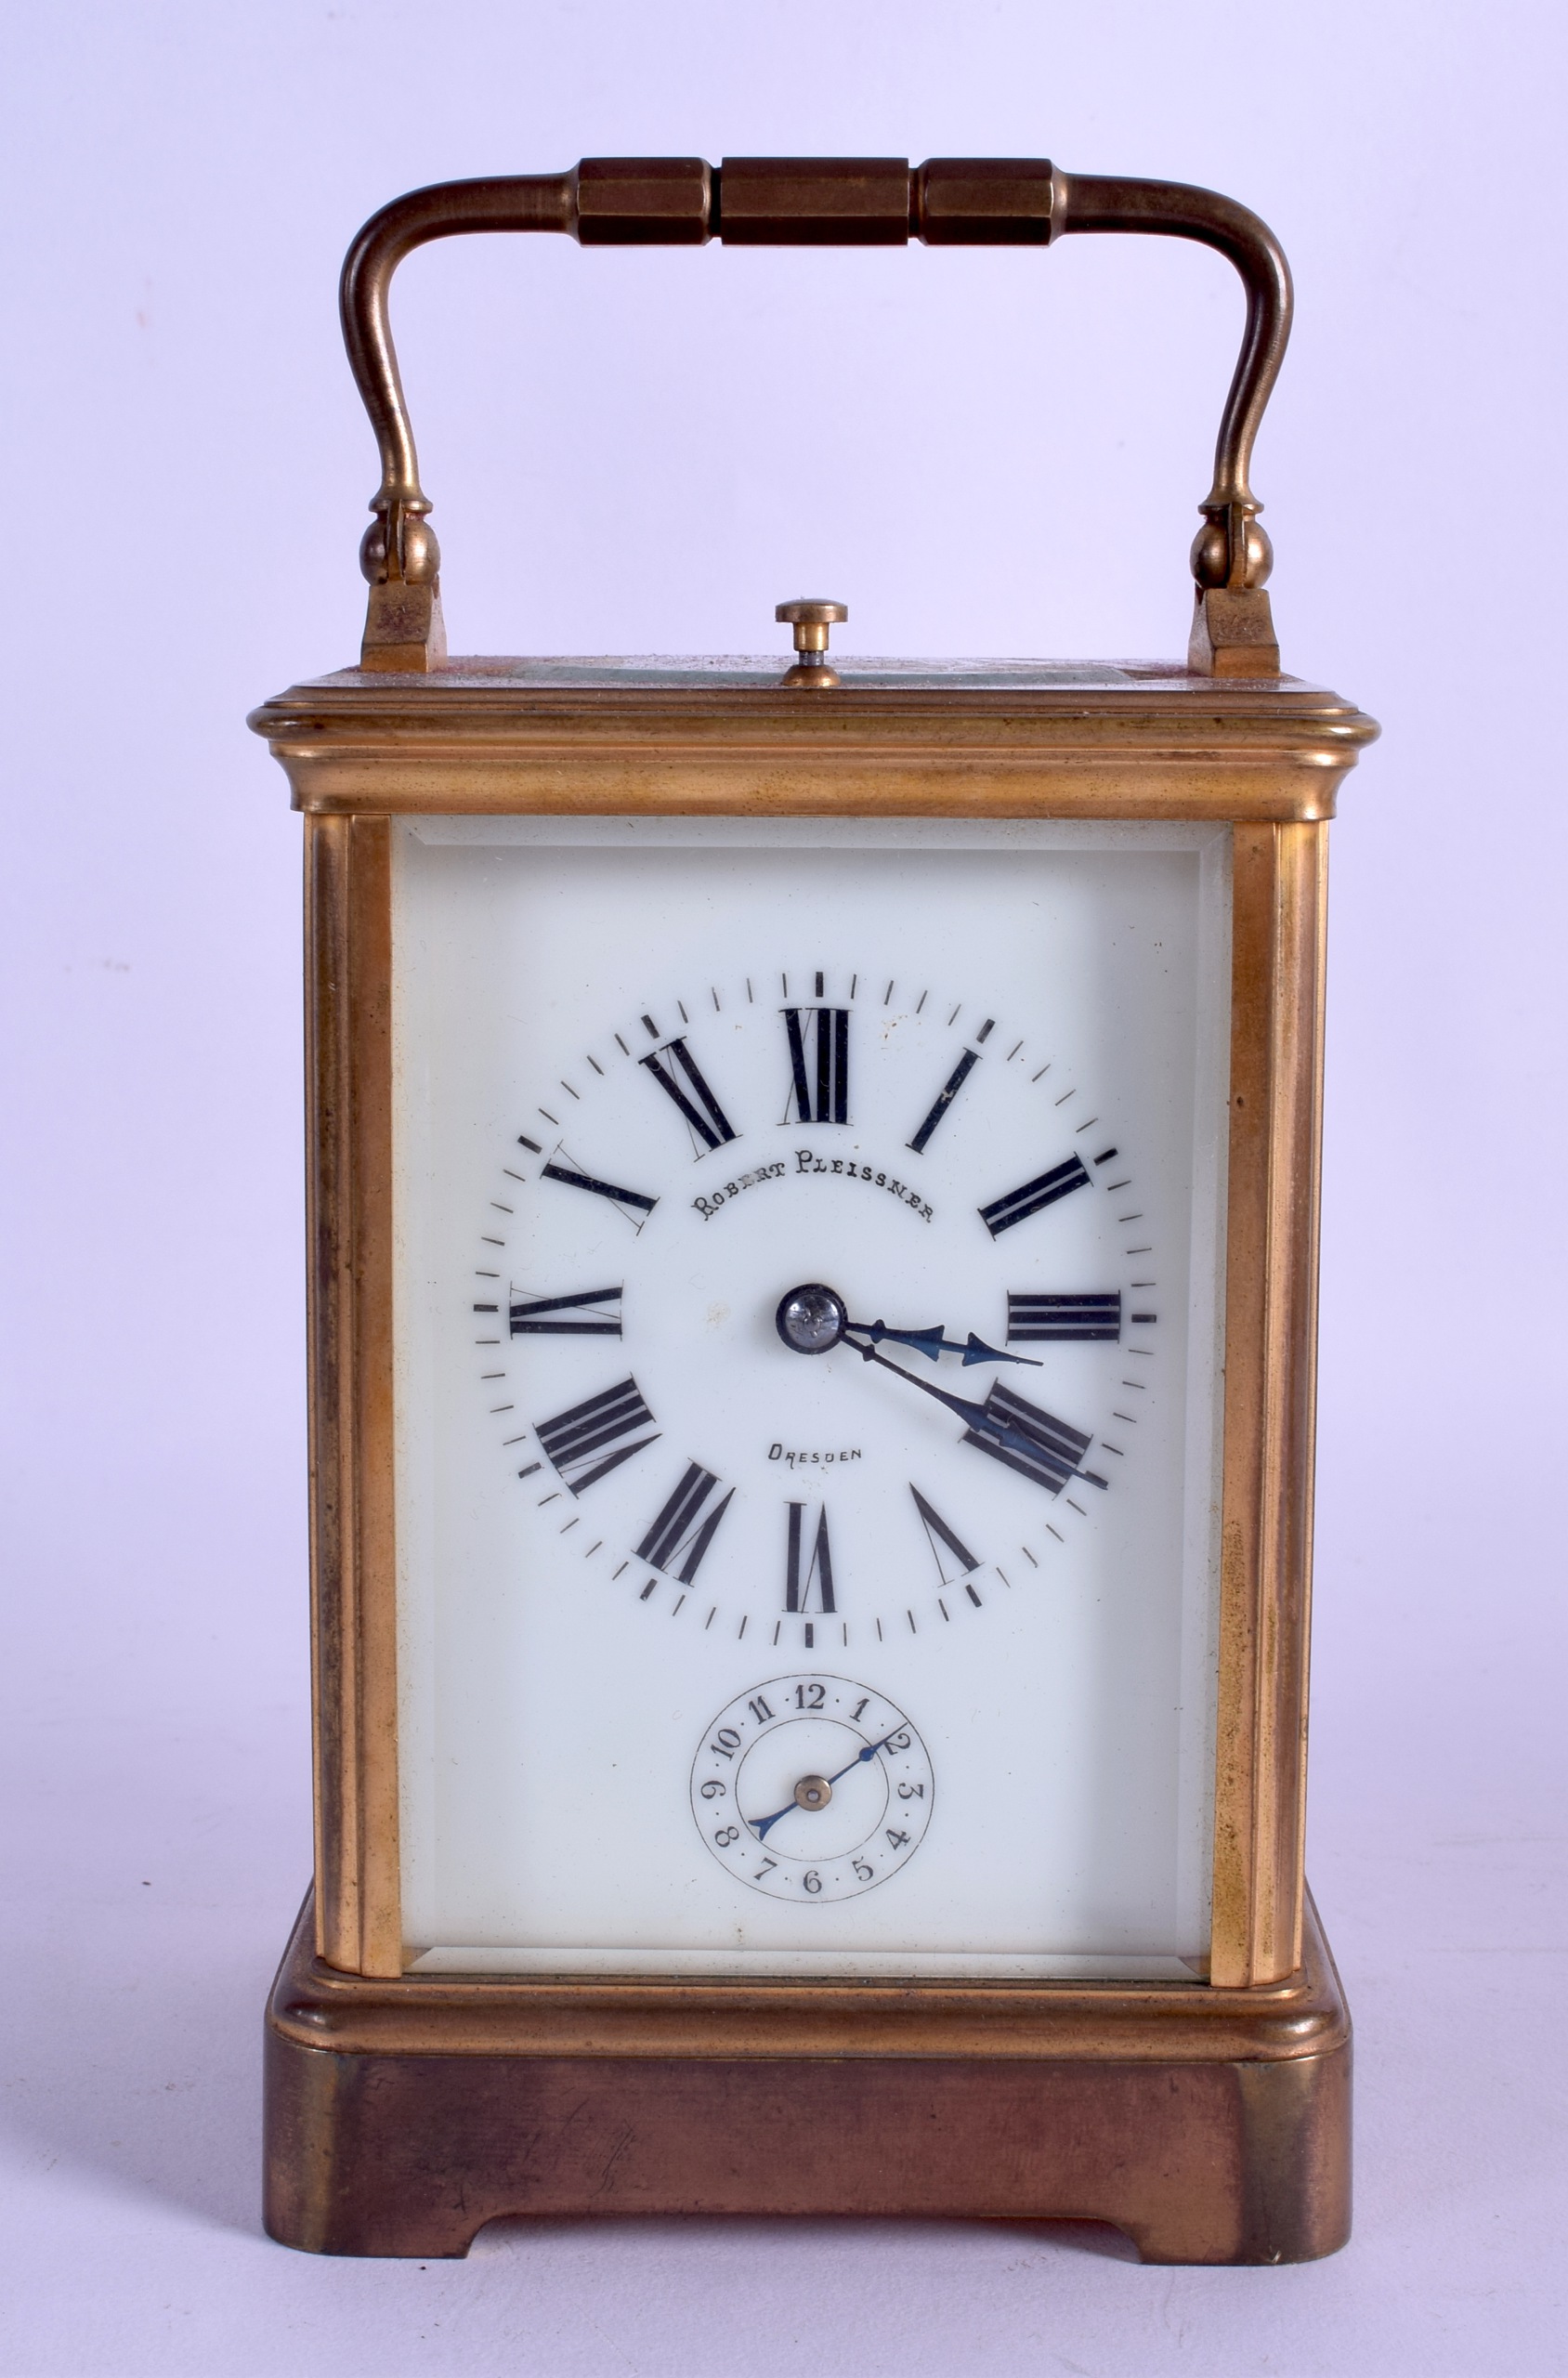 AN ANTIQUE FRENCH REPEATING BRASS CARRIAGE CLOCK by Robert Pleissner of Dresden. 18 cm high inc